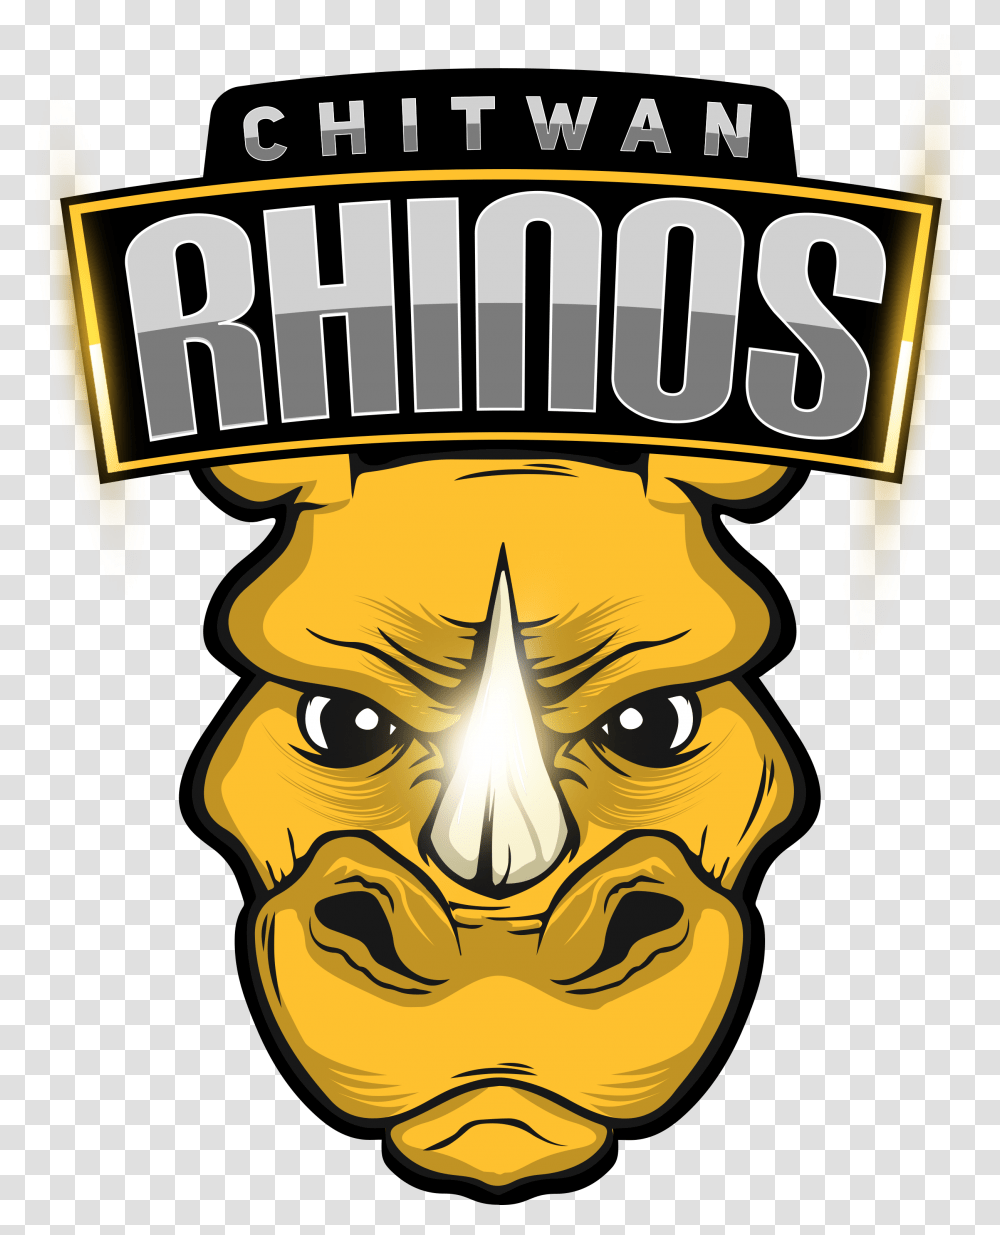 Chitwan Rhinos In Pokhara Premier League Clipart, Poster, Advertisement Transparent Png